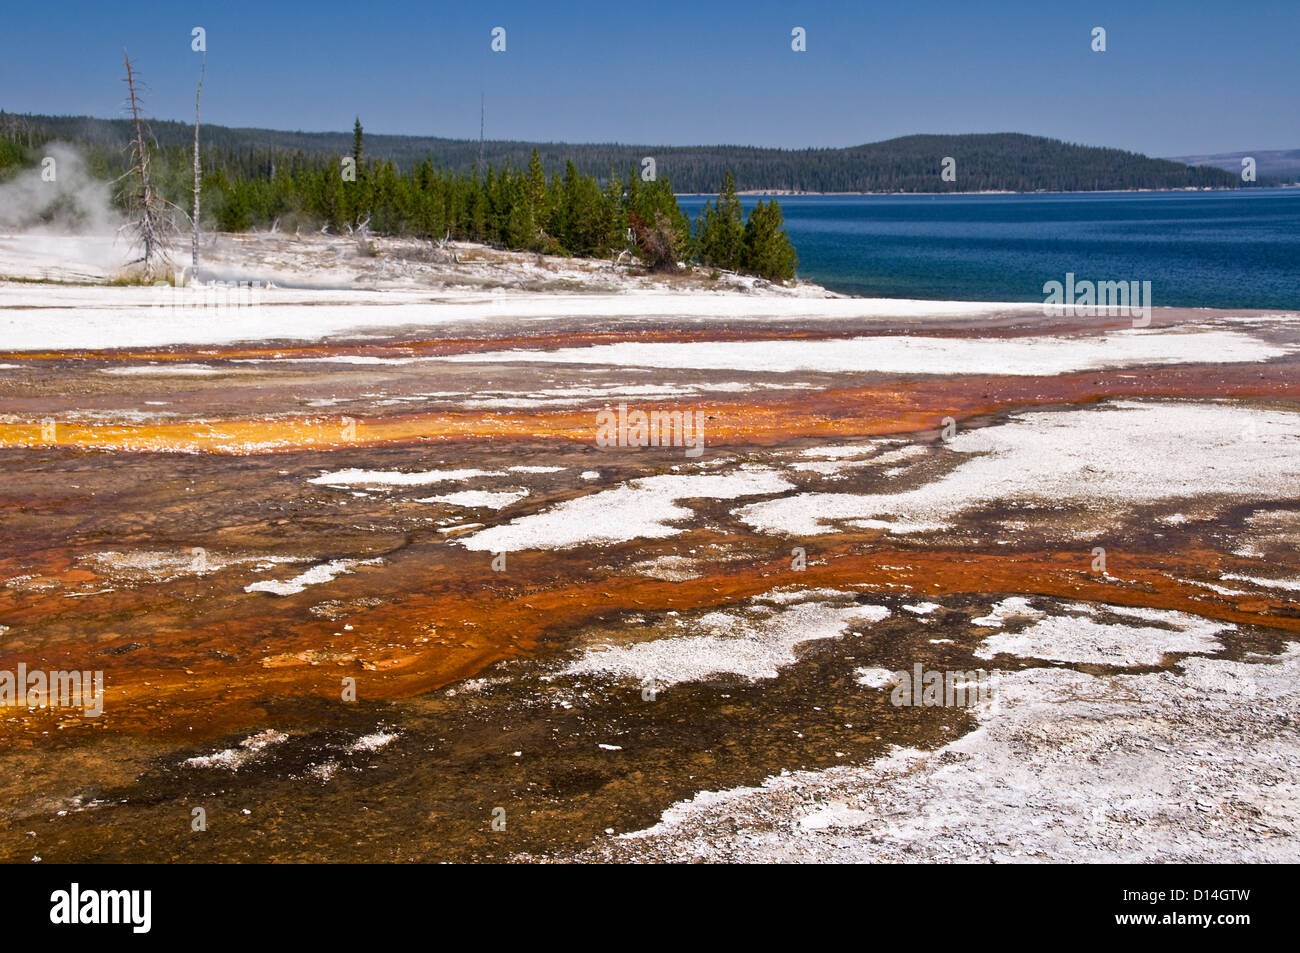 Hot spring with the lake in background - West thumb geyser basin, Yellowstone Lake, Yellowstone national Park - Wyoming, USA Stock Photo